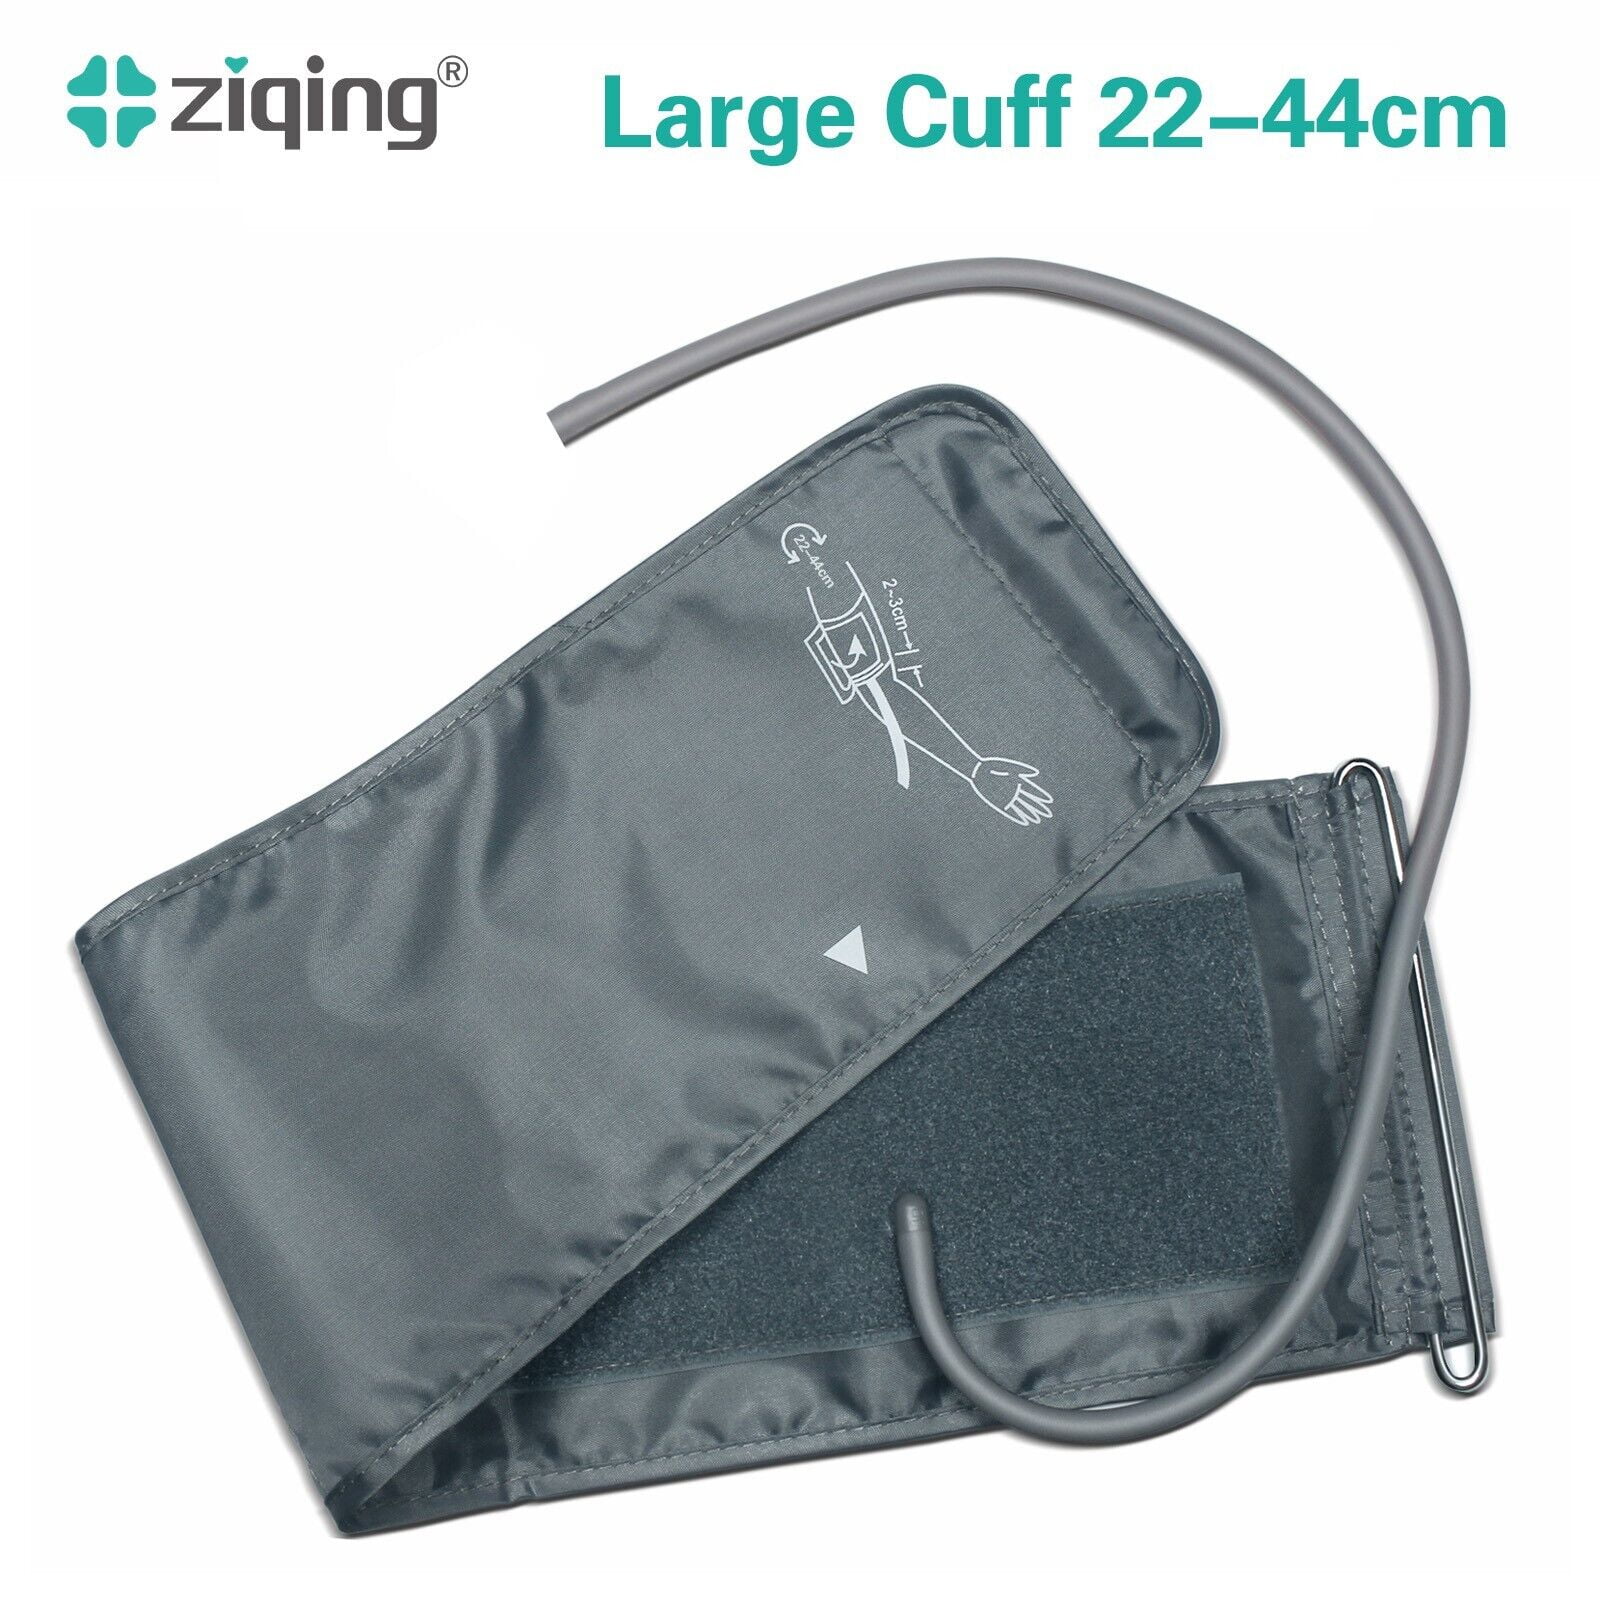 YBHOC Large Extra Replacement Blood Pressure Cuff, Applicable for  14.9-21.6/38-55cm, Fits More Adult Arm Circumferences(Cuff Only, Not  Included BP